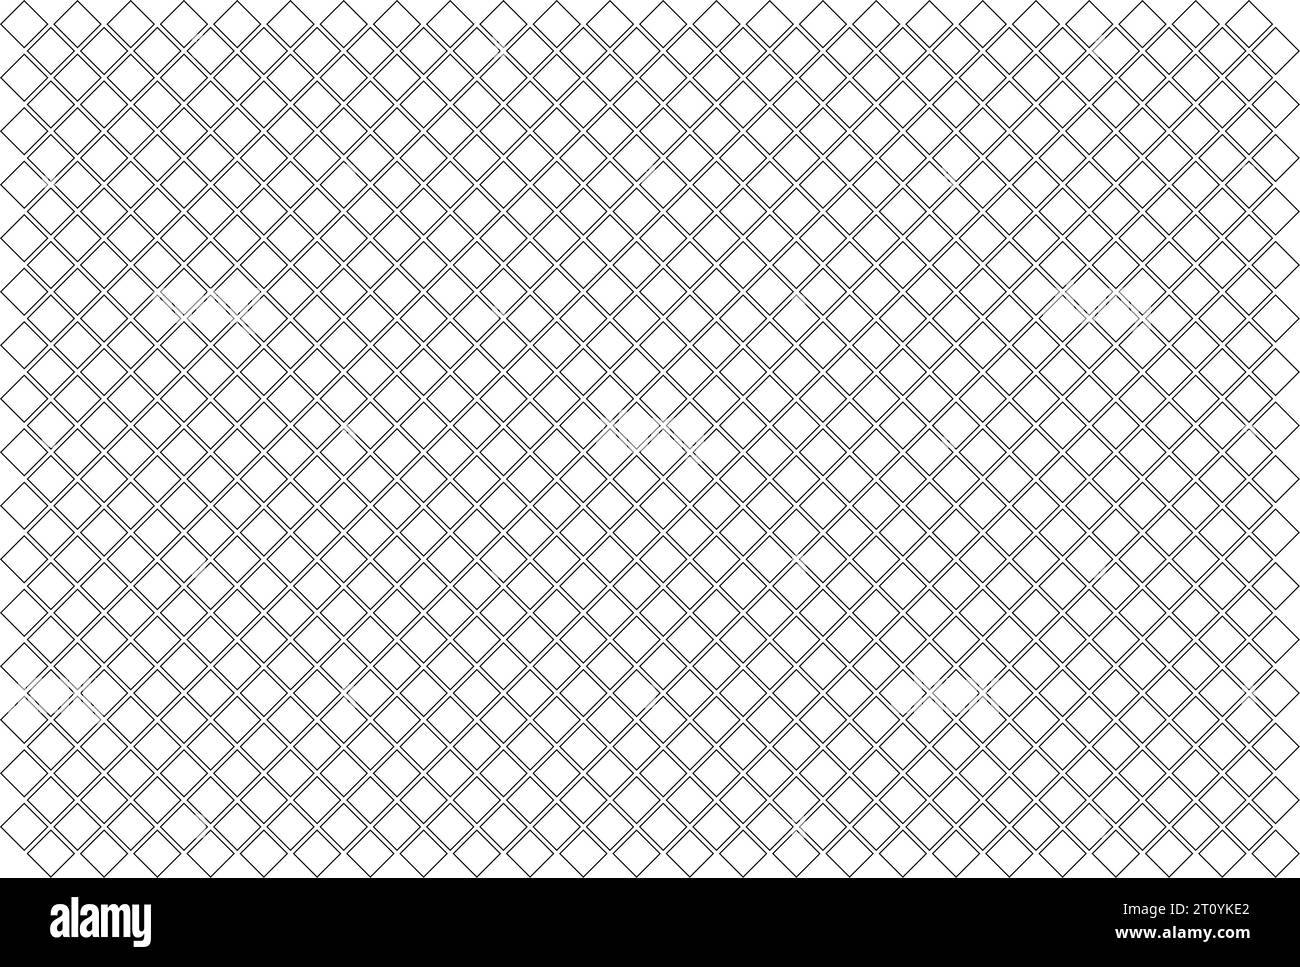 White Mesh Fabric Texture. Cloth With Large Cells Stock Photo